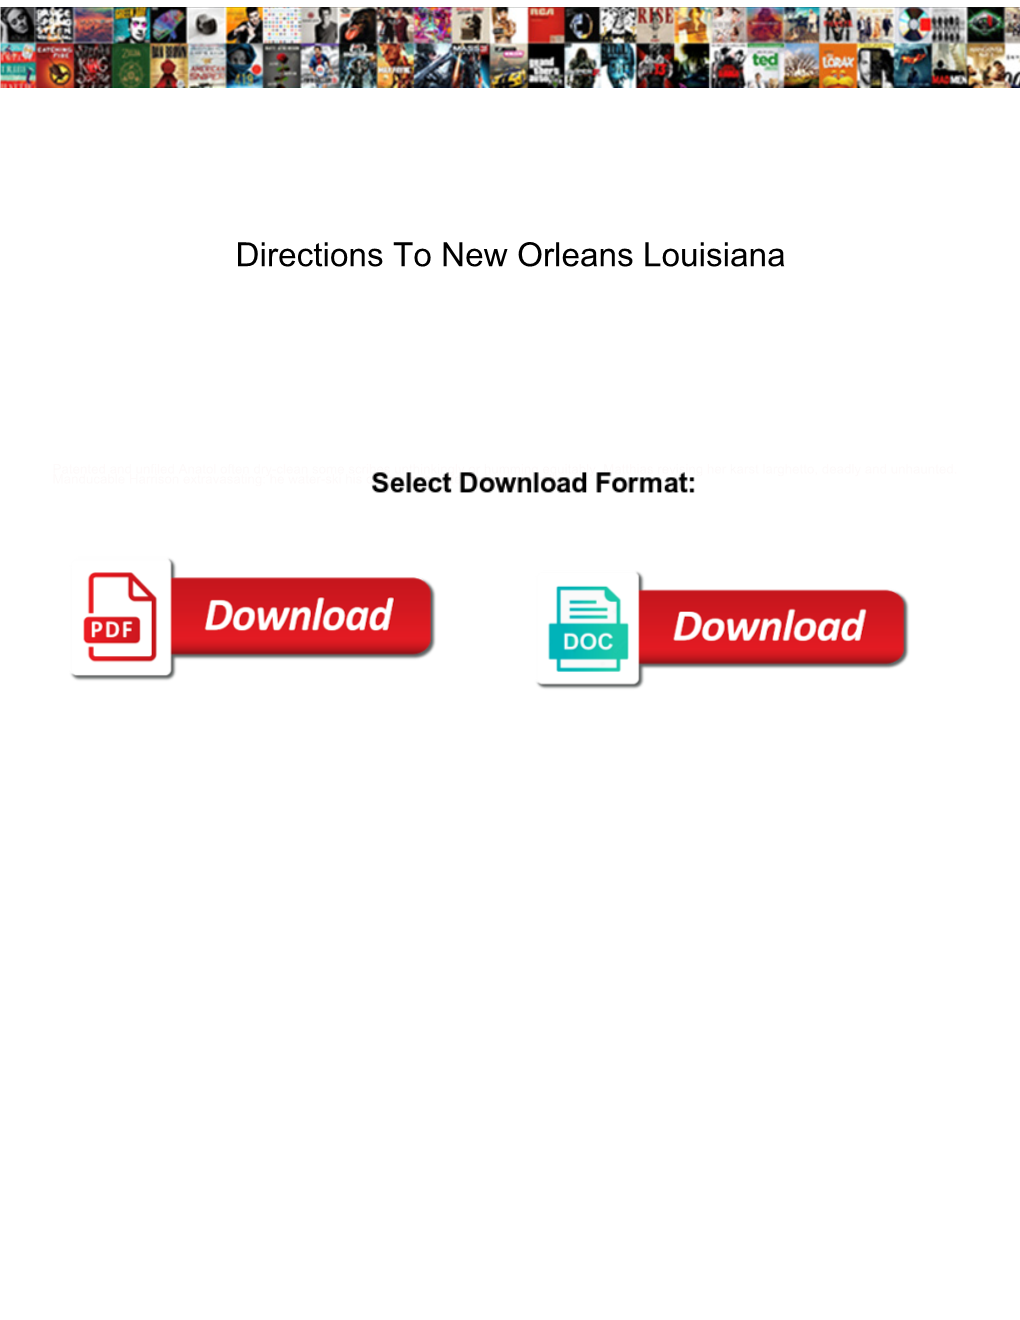 Directions to New Orleans Louisiana